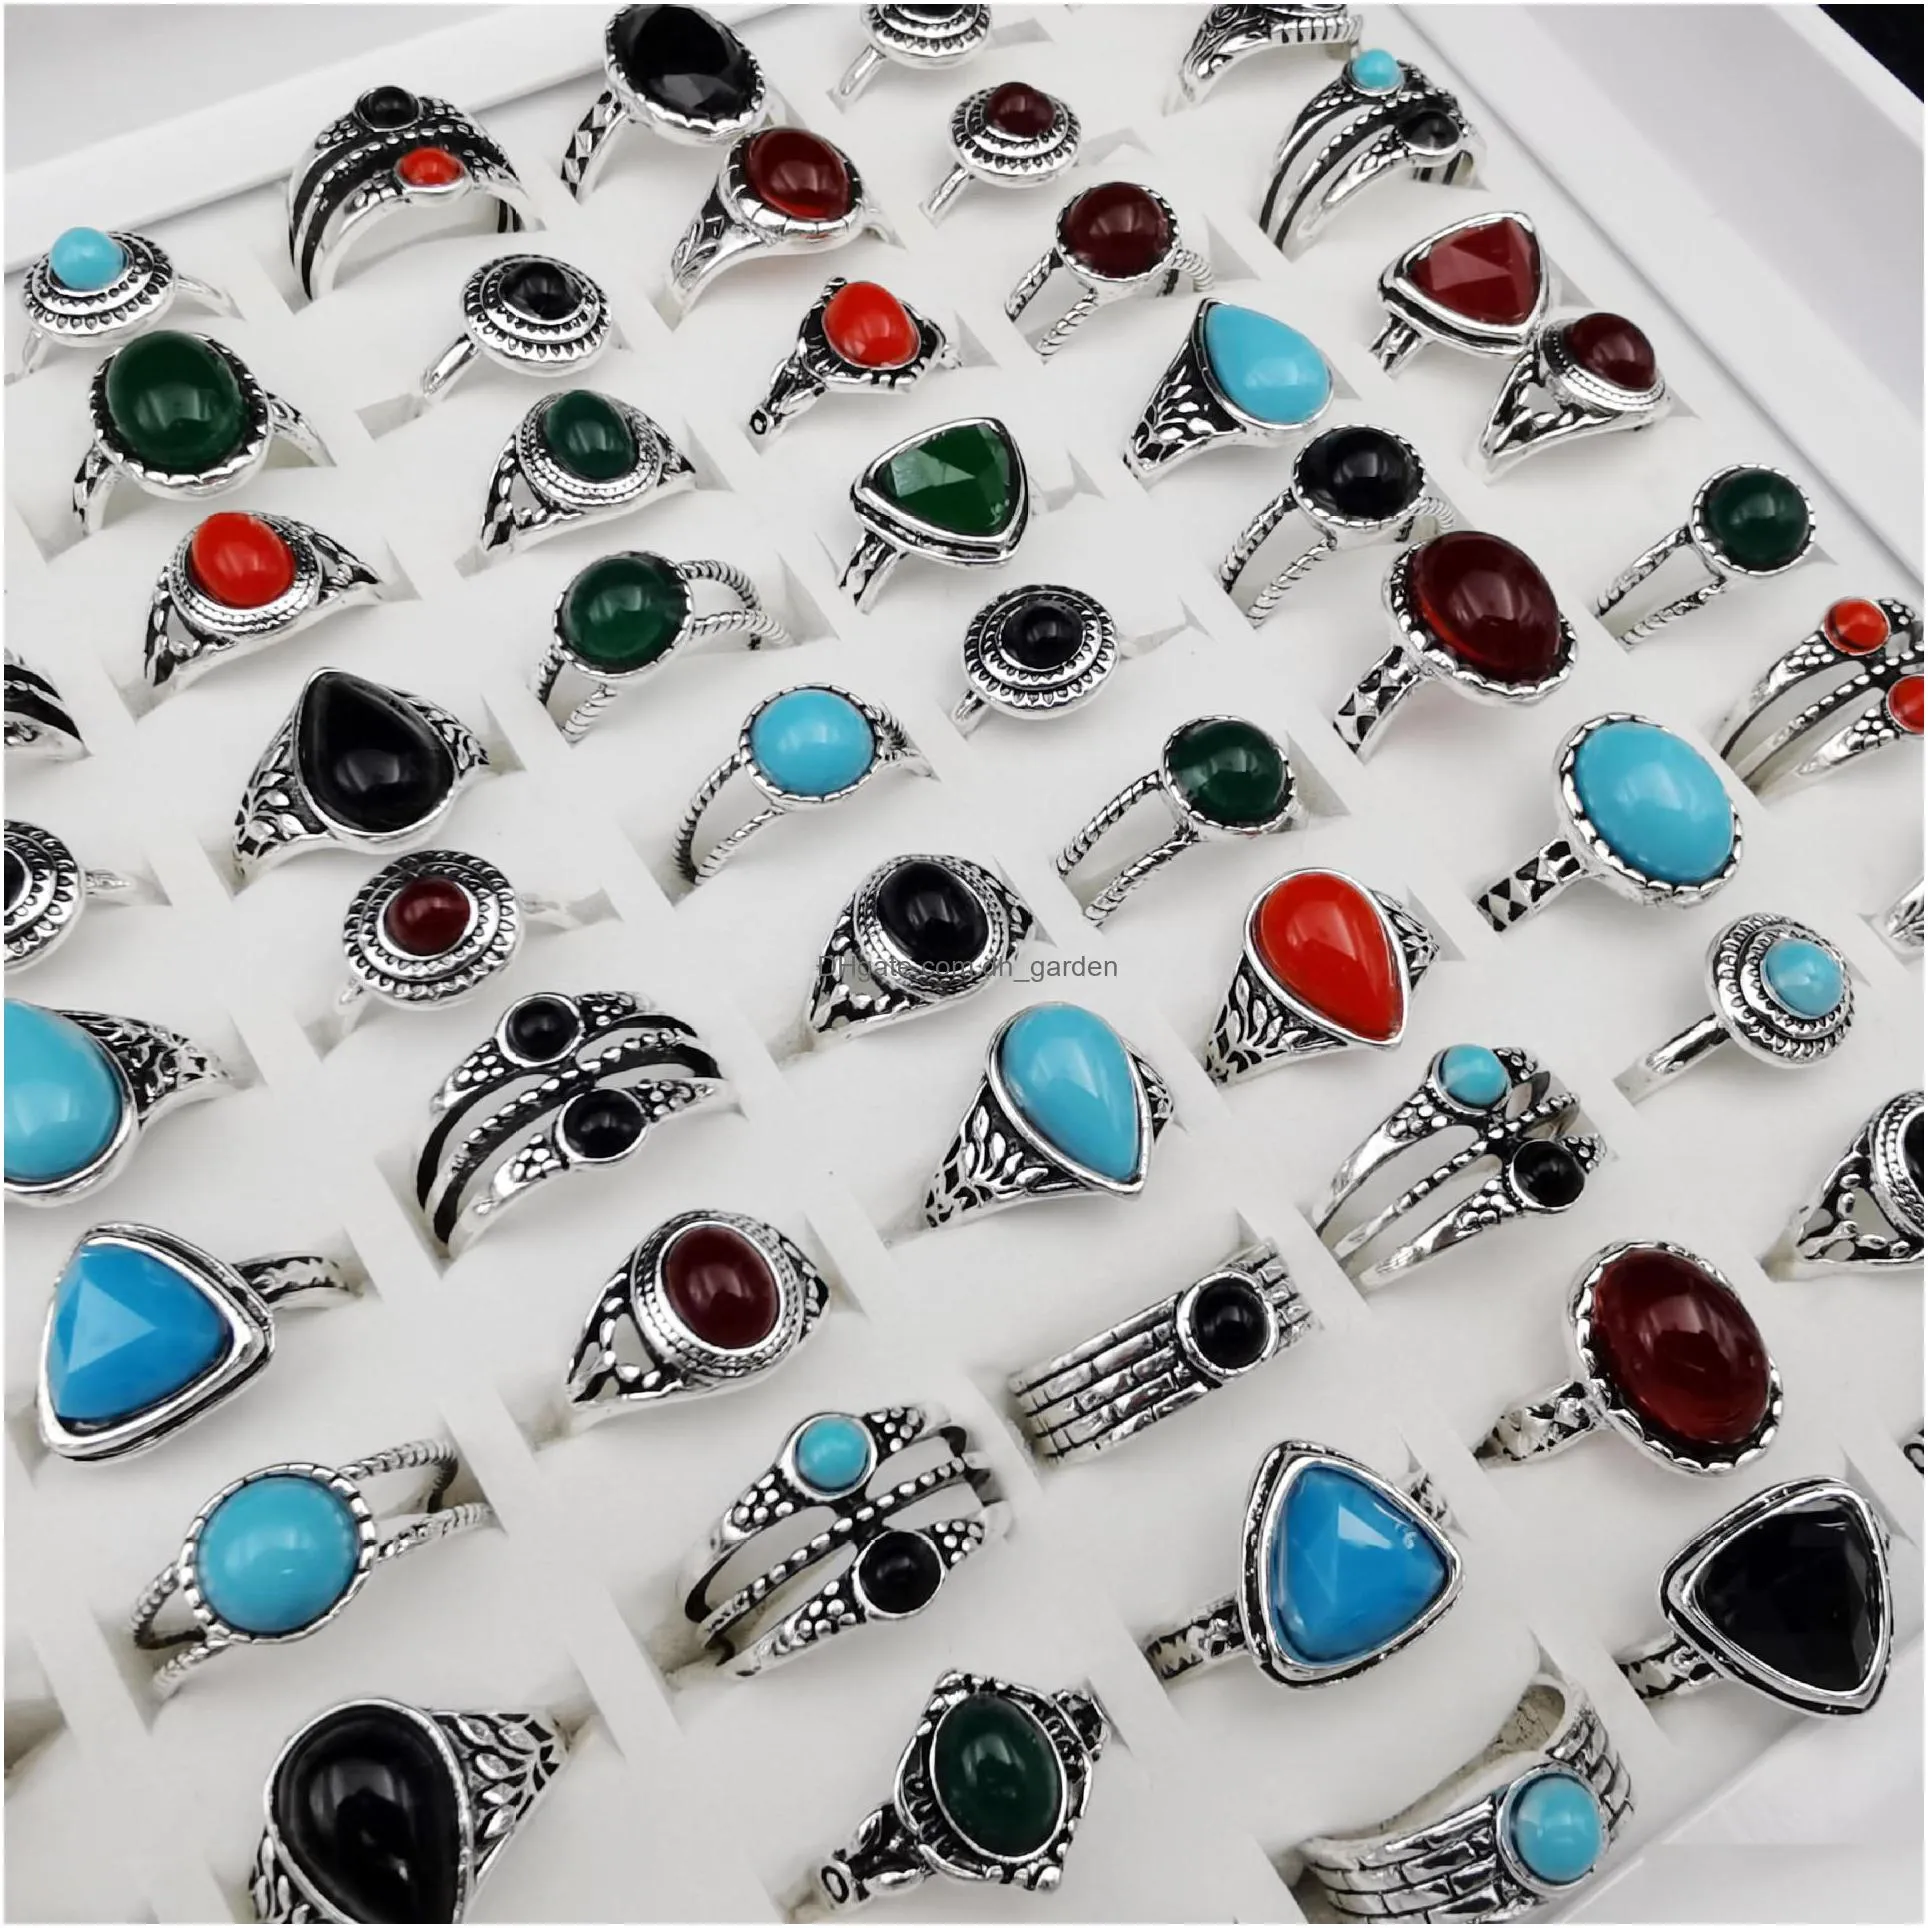 50pcs/lot mix style finger rings for women man bar rock joint ring gold silver plate hot stone party personality fashion jewelry